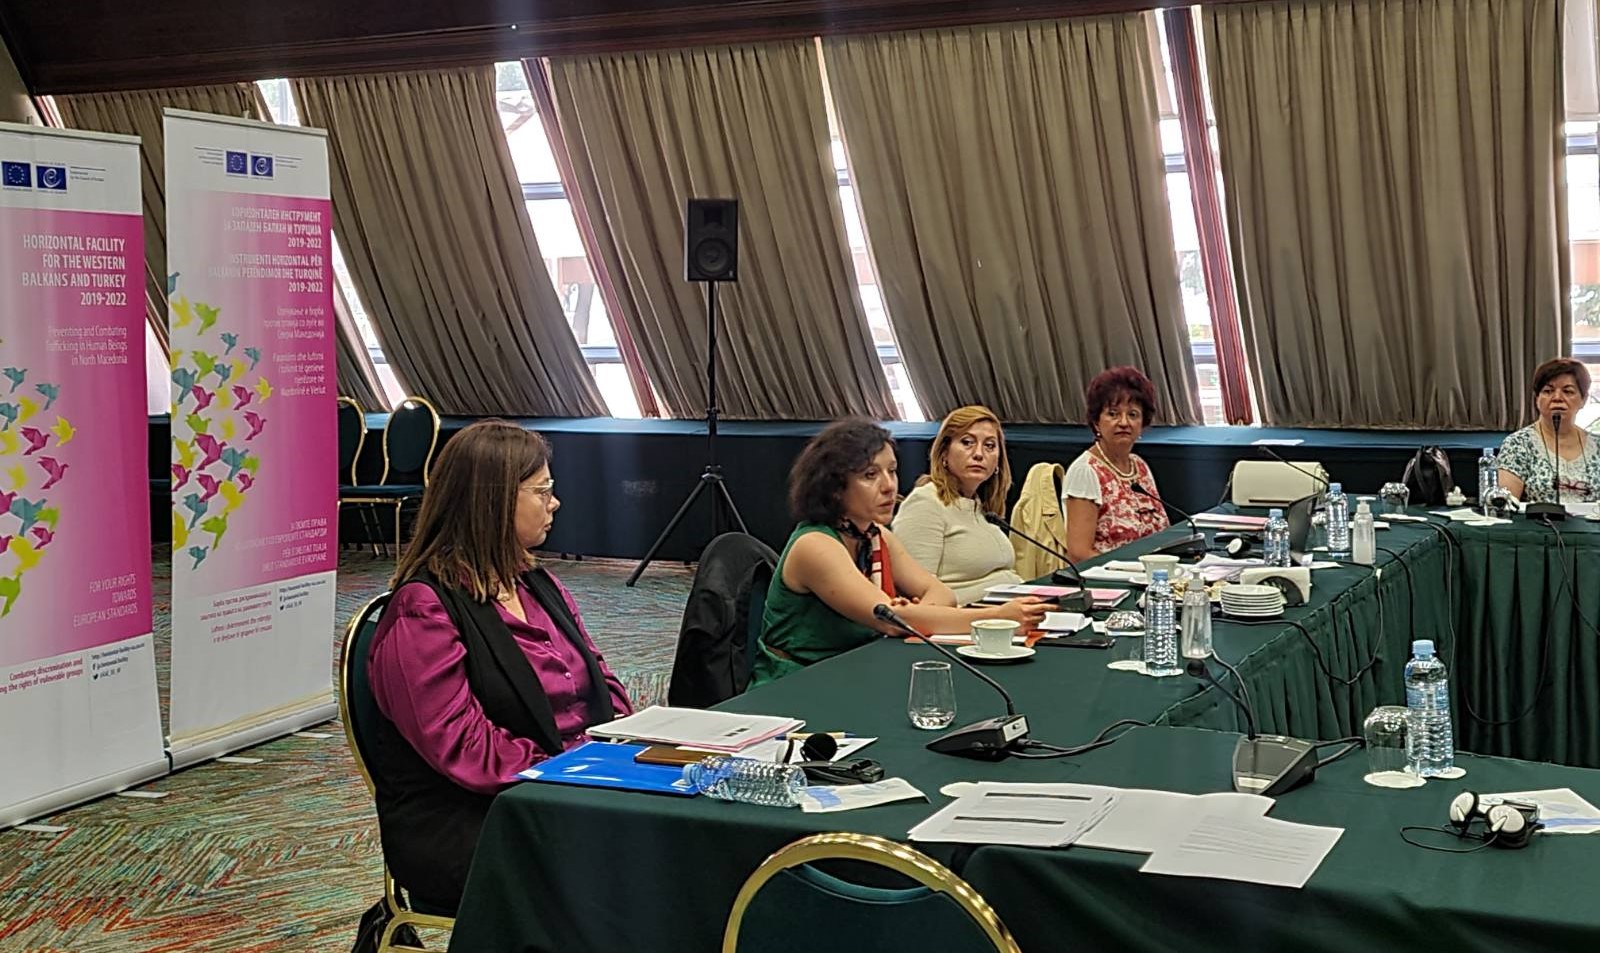 Health professionals to contribute in the proactive identification and referral of potential human trafficking victims in North Macedonia